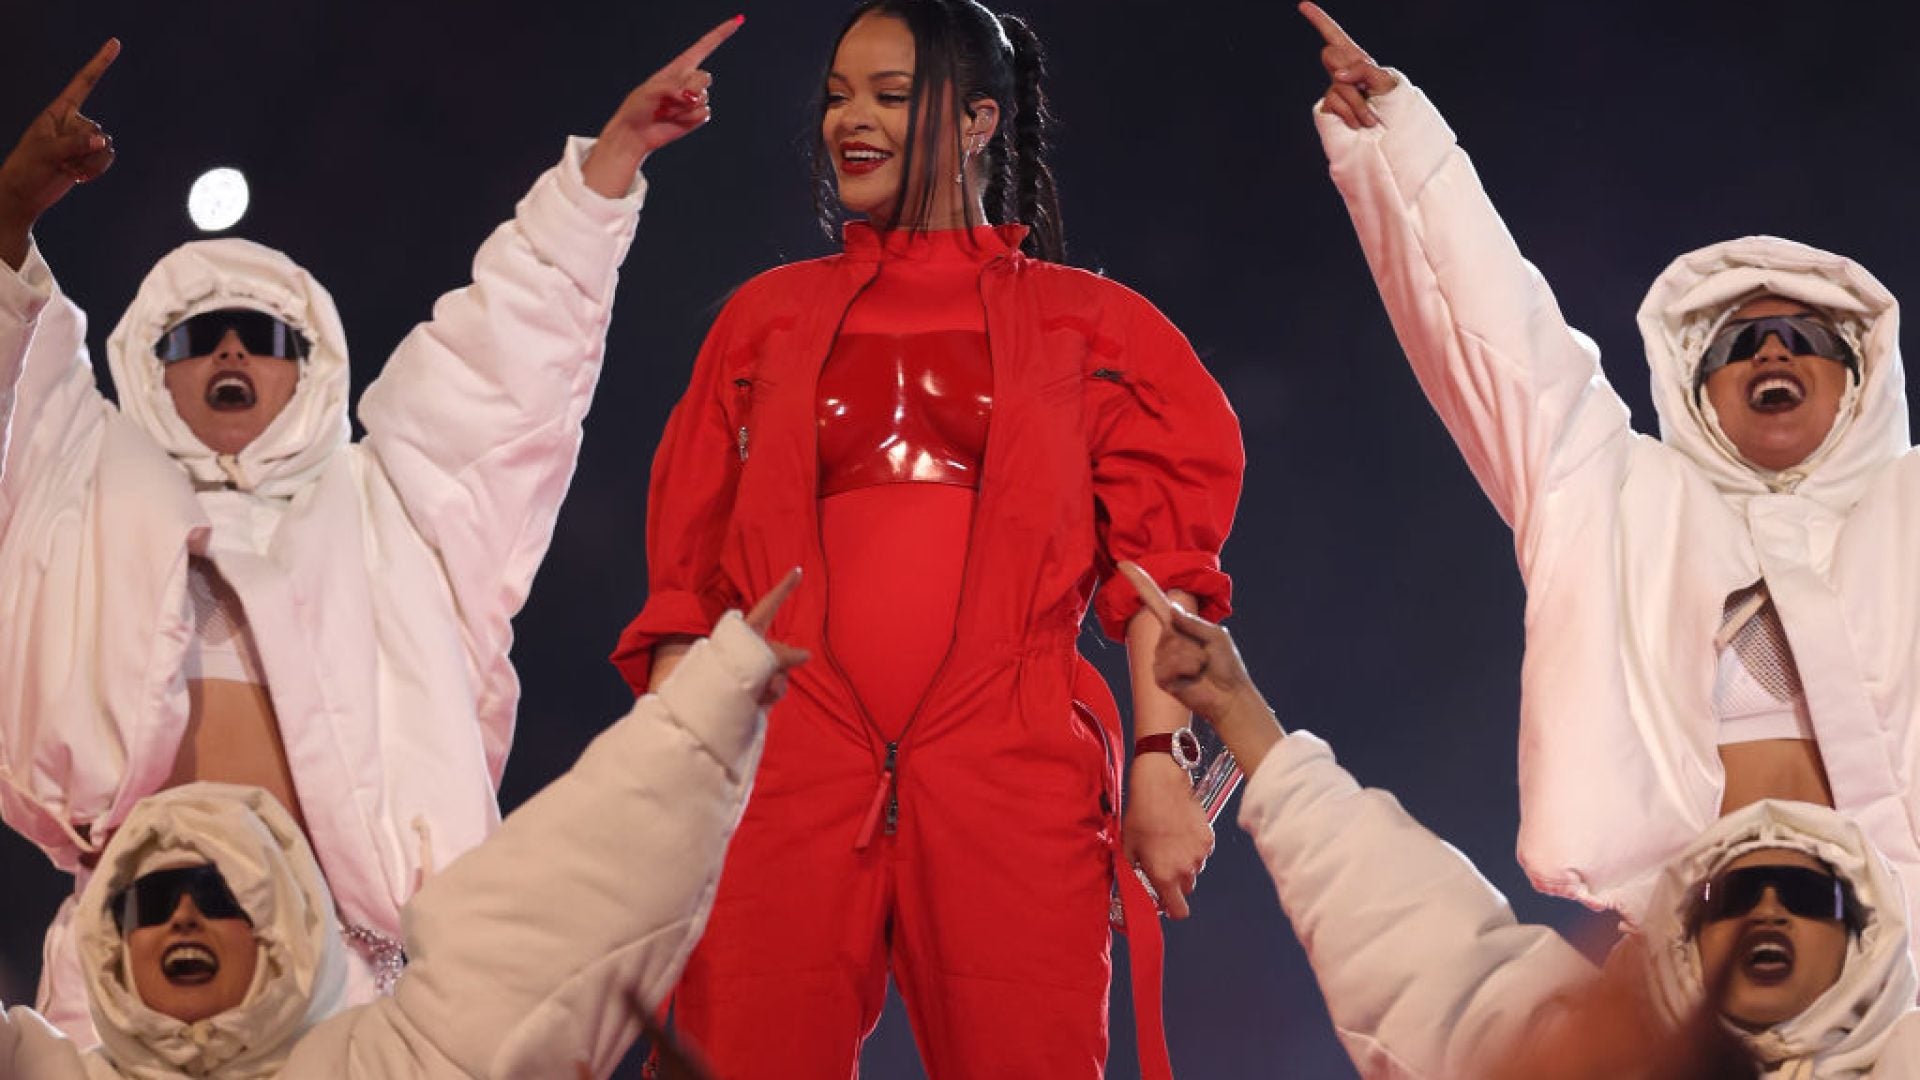 A Love Letter To Rihanna, From One Bajan To Another